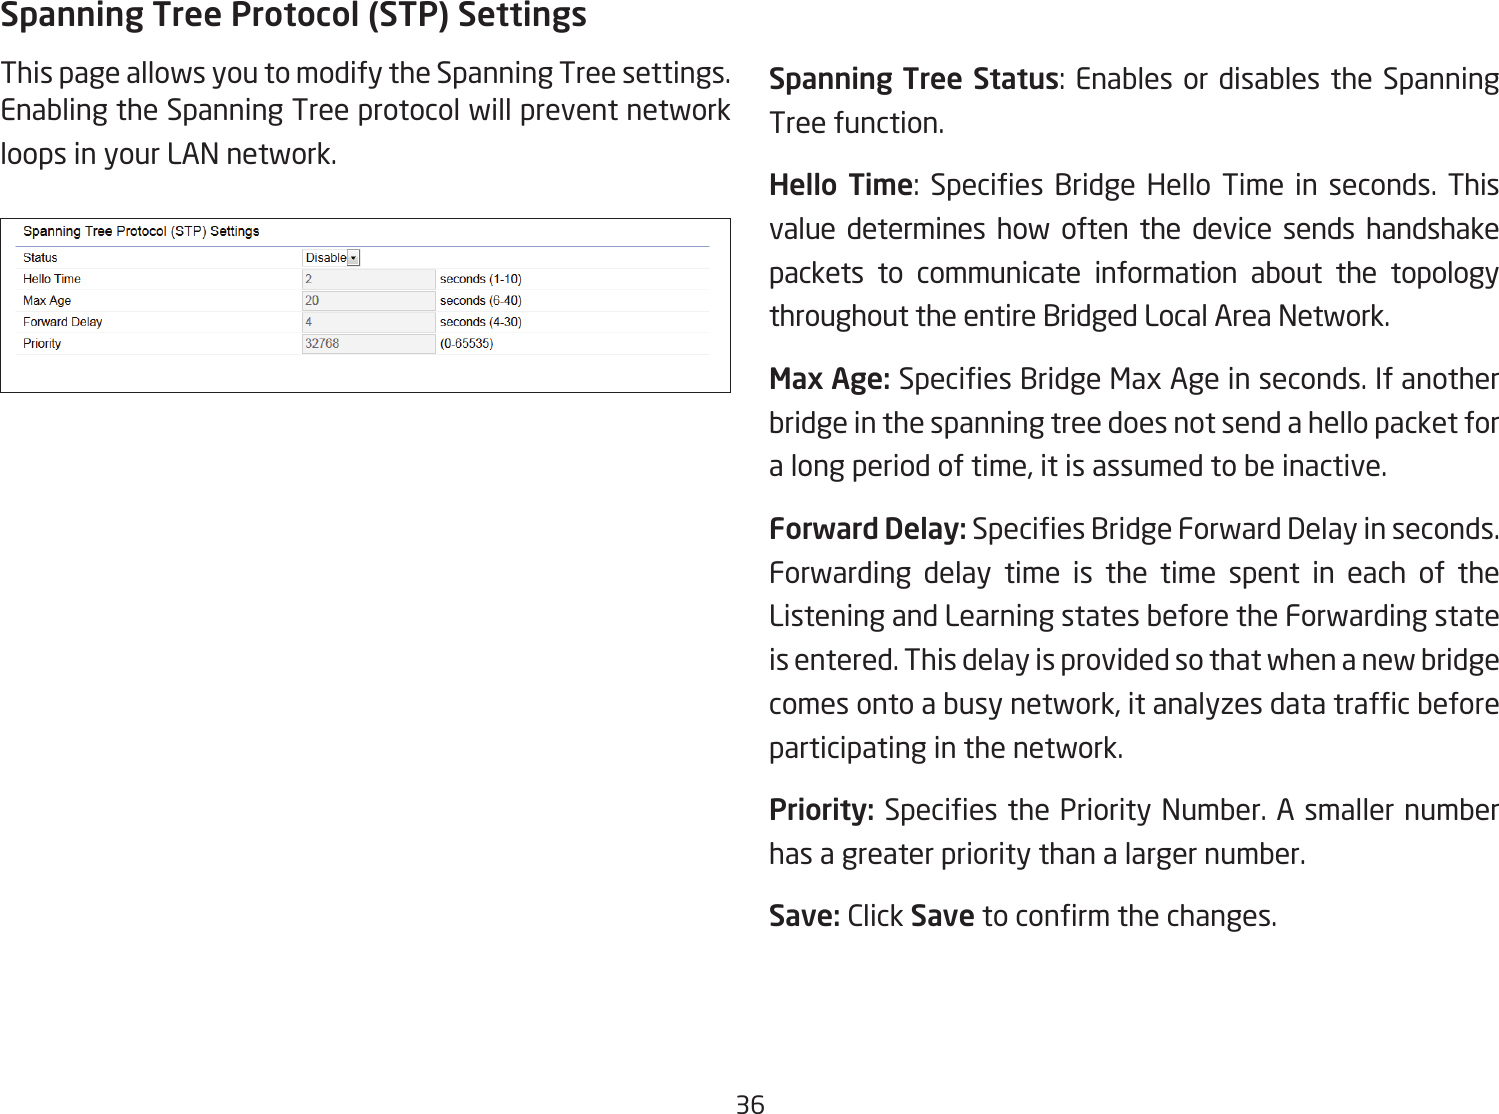 36Spanning Tree Protocol (STP) SettingsThis page allows you to modify the Spanning Tree settings. Enabling the Spanning Tree protocol will prevent network loops in your LAN network. Spanning Tree Status: Enables or disables the Spanning Tree function.Hello  Time: Species Bridge Hello Time in seconds. Thisvalue determines how often the device sends handshake packets to communicate information about the topology throughout the entire Bridged Local Area Network.Max Age: SpeciesBridgeMaxAgeinseconds.Ifanotherbridge in the spanning tree does not send a hello packet for a long period of time, it is assumed to be inactive.Forward Delay:SpeciesBridgeForwardDelayinseconds.Forwarding delay time is the time spent in each of the Listening and Learning states before the Forwarding state is entered. This delay is provided so that when a new bridge comesontoabusynetwork,itanalyzesdatatrafcbeforeparticipating in the network.Priority: SpeciesthePriorityNumber.Asmallernumberhas a greater priority than a larger number.Save: Click Savetoconrmthechanges.